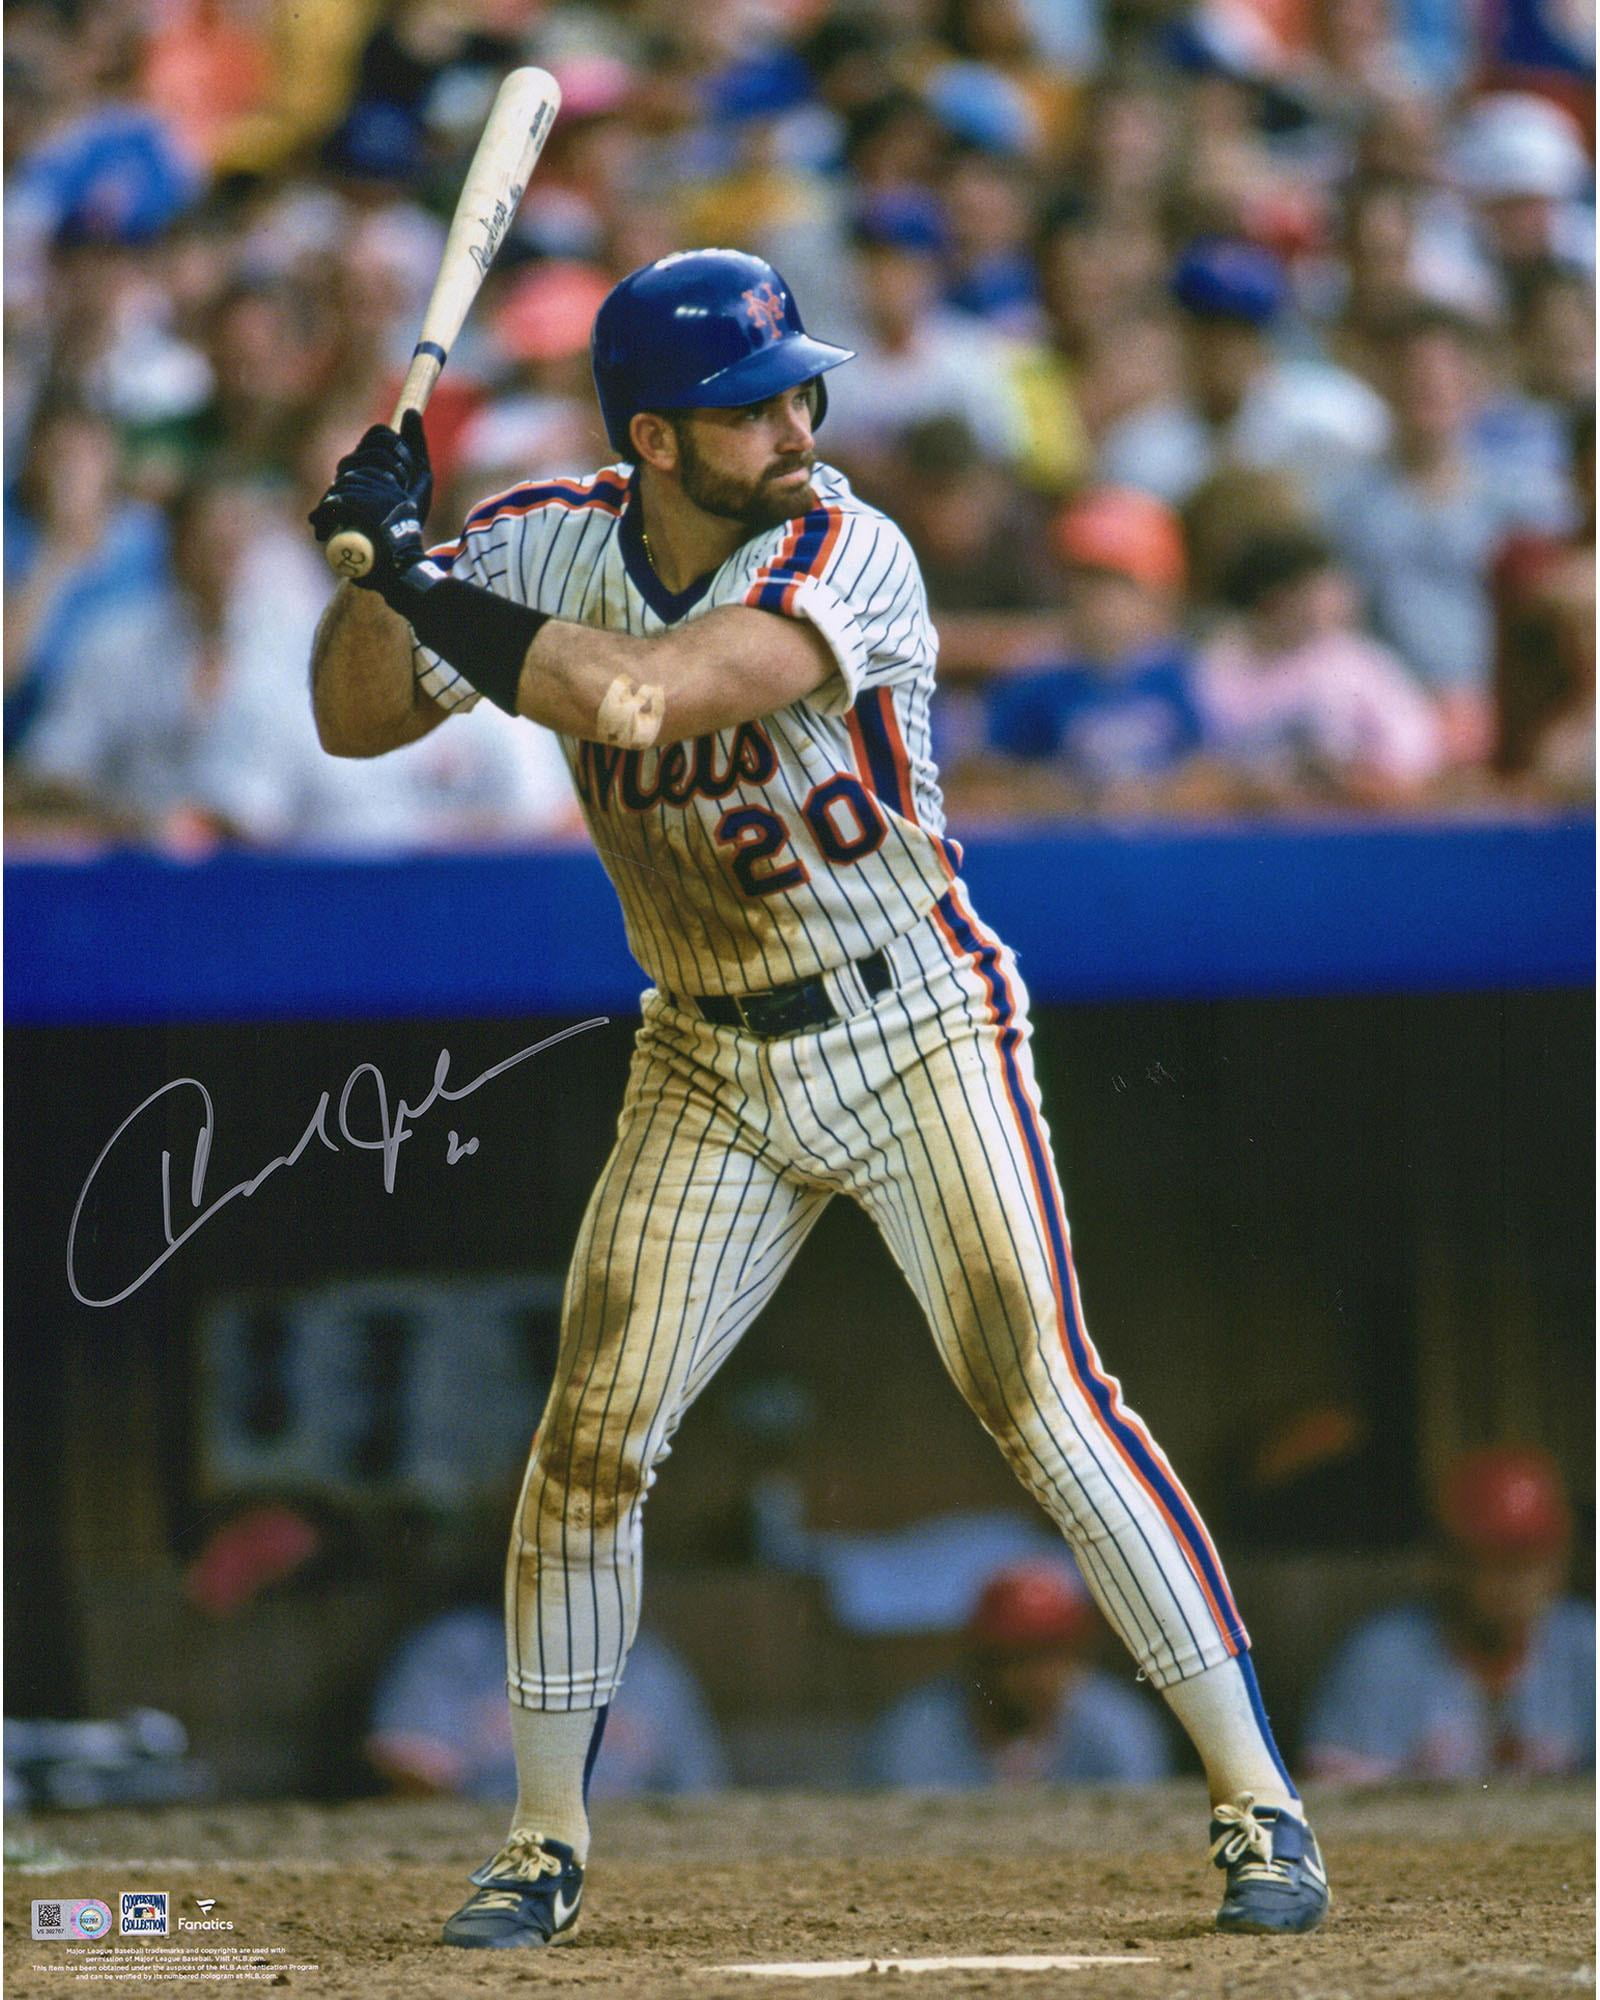 Fanatics Authentic Certified Darryl Strawberry New York Mets Autographed 16 x 20 Slugging Photograph 